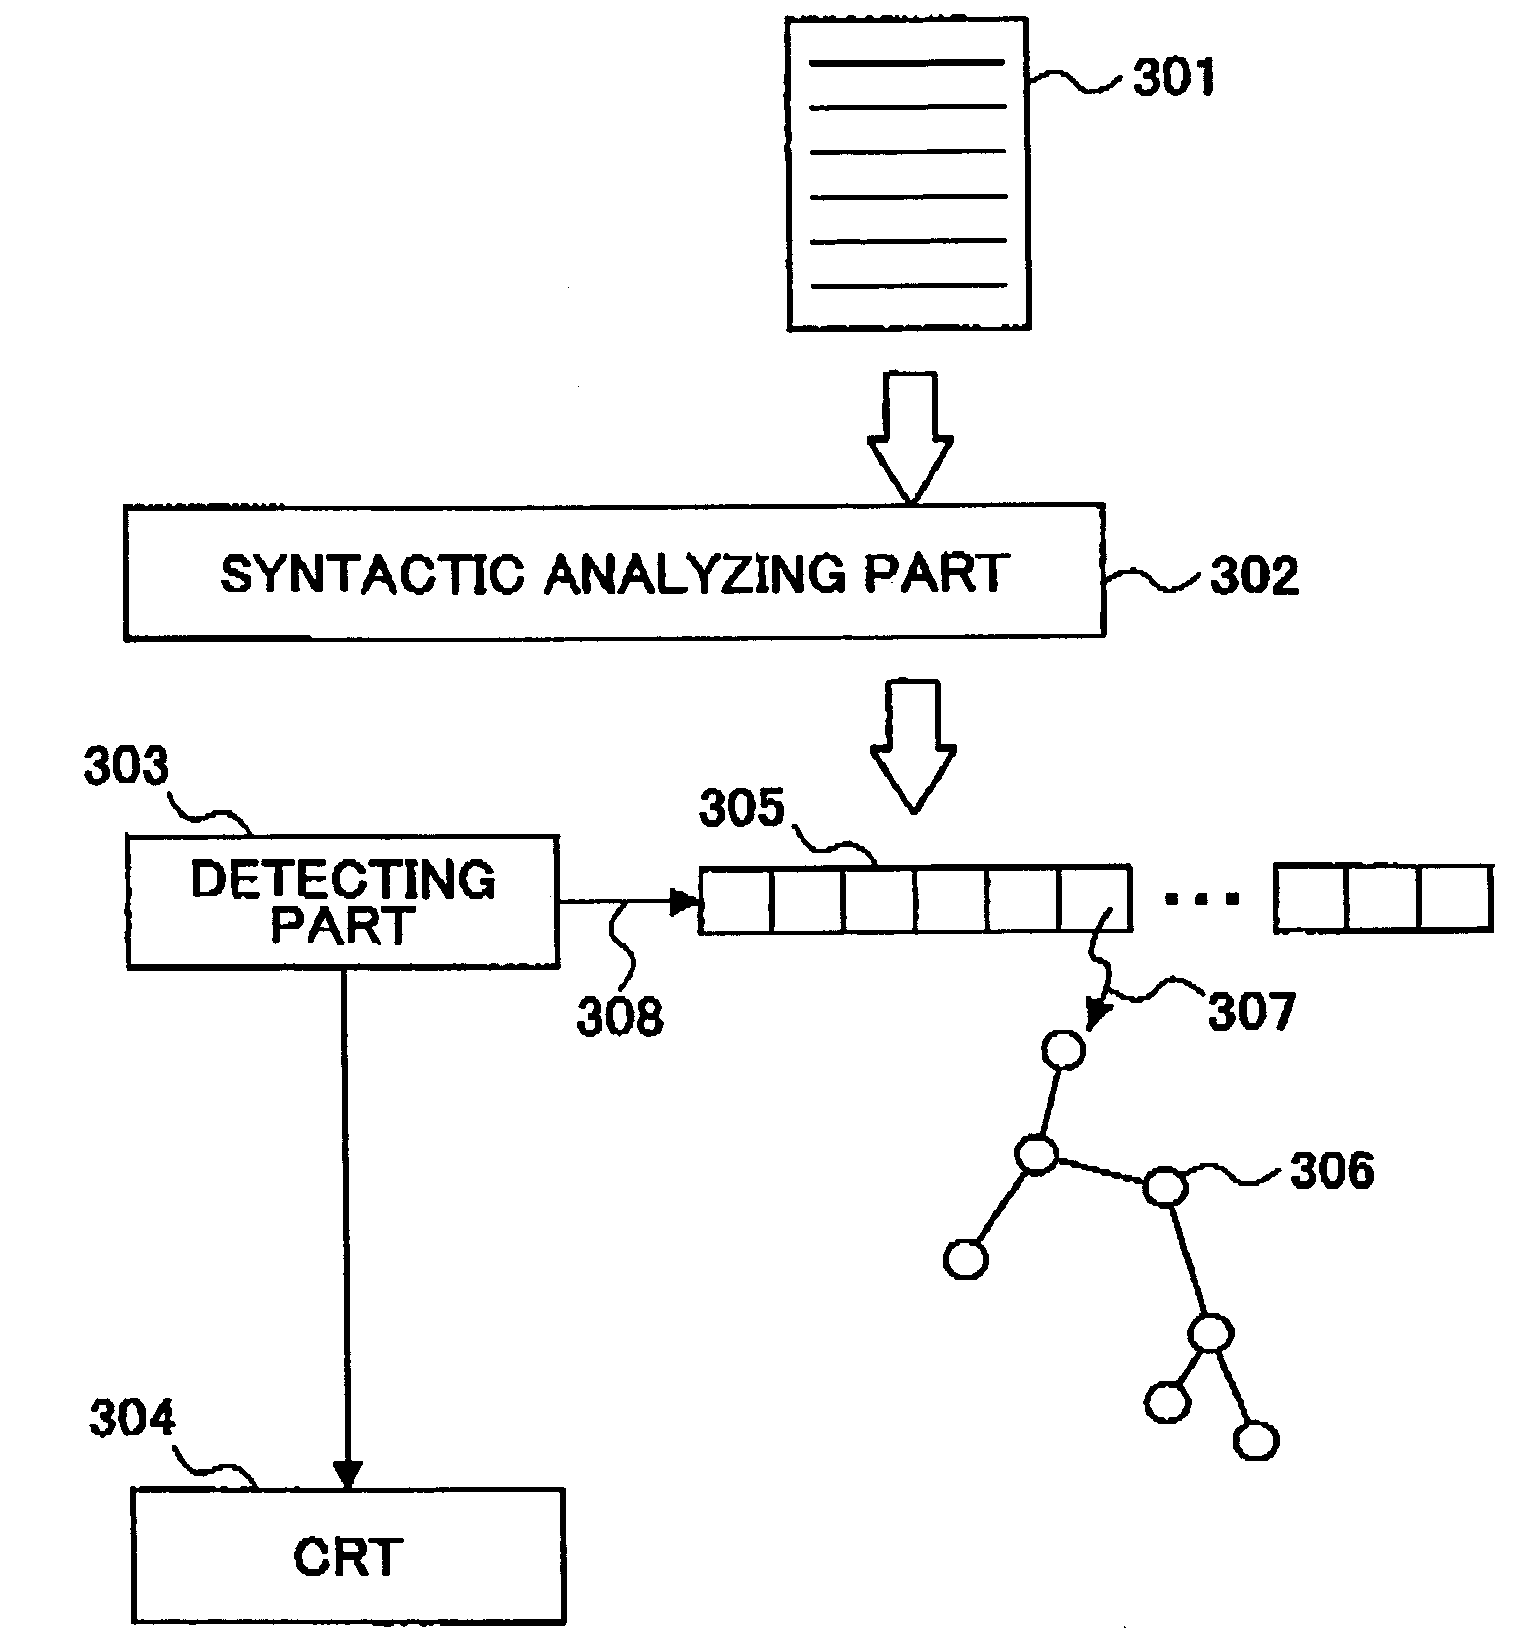 Design supporting apparatus capable of checking functional description of large-scale integrated circuit to detect fault in said circuit